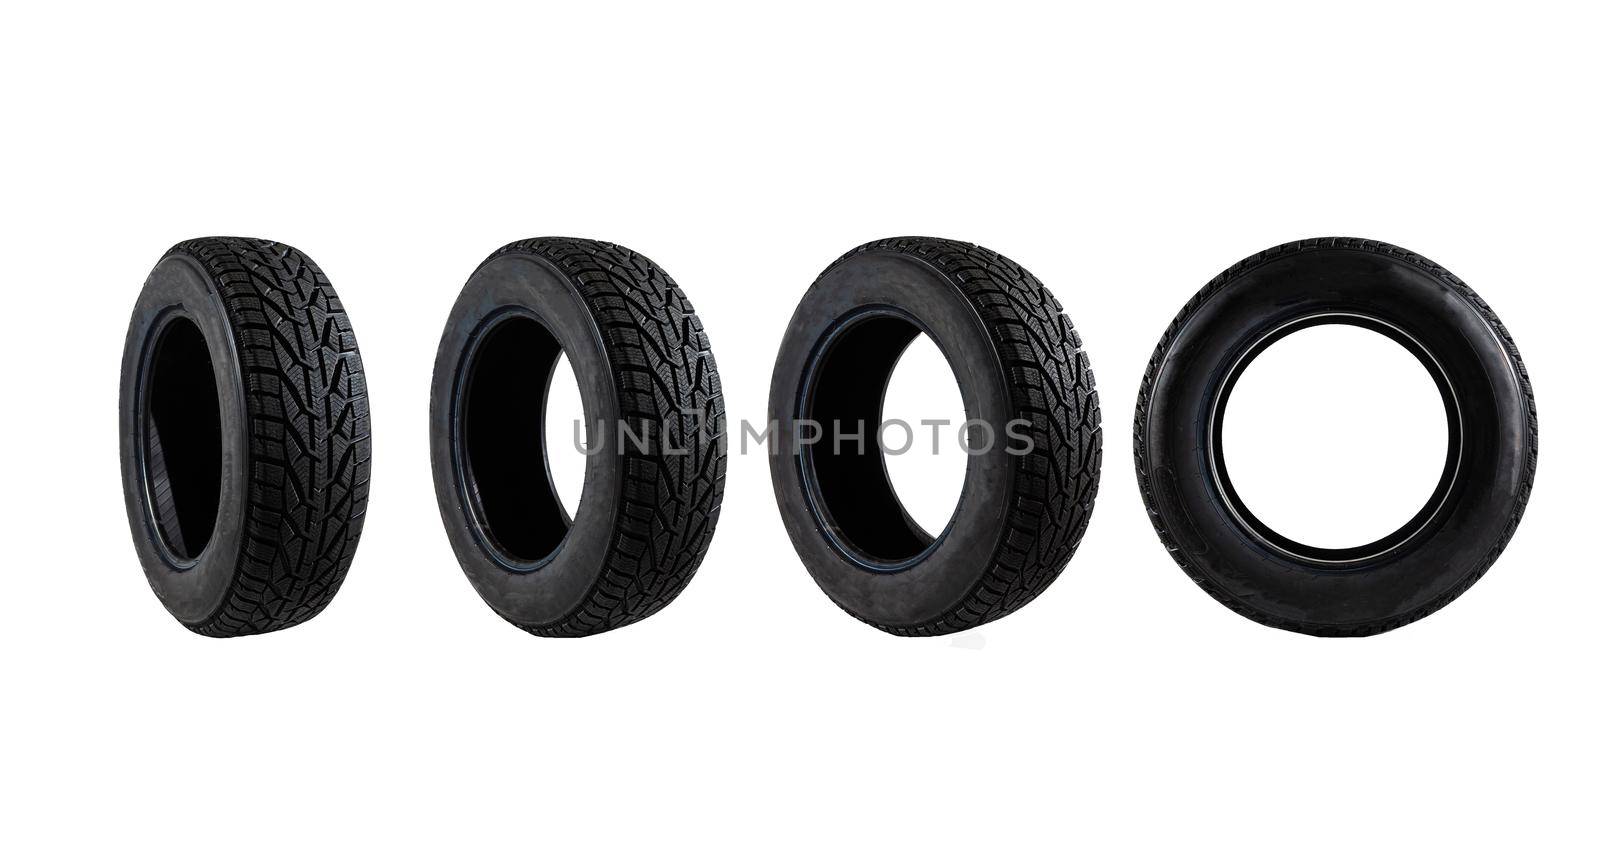 set of black car tires lined up horizontally on white background by Andelov13